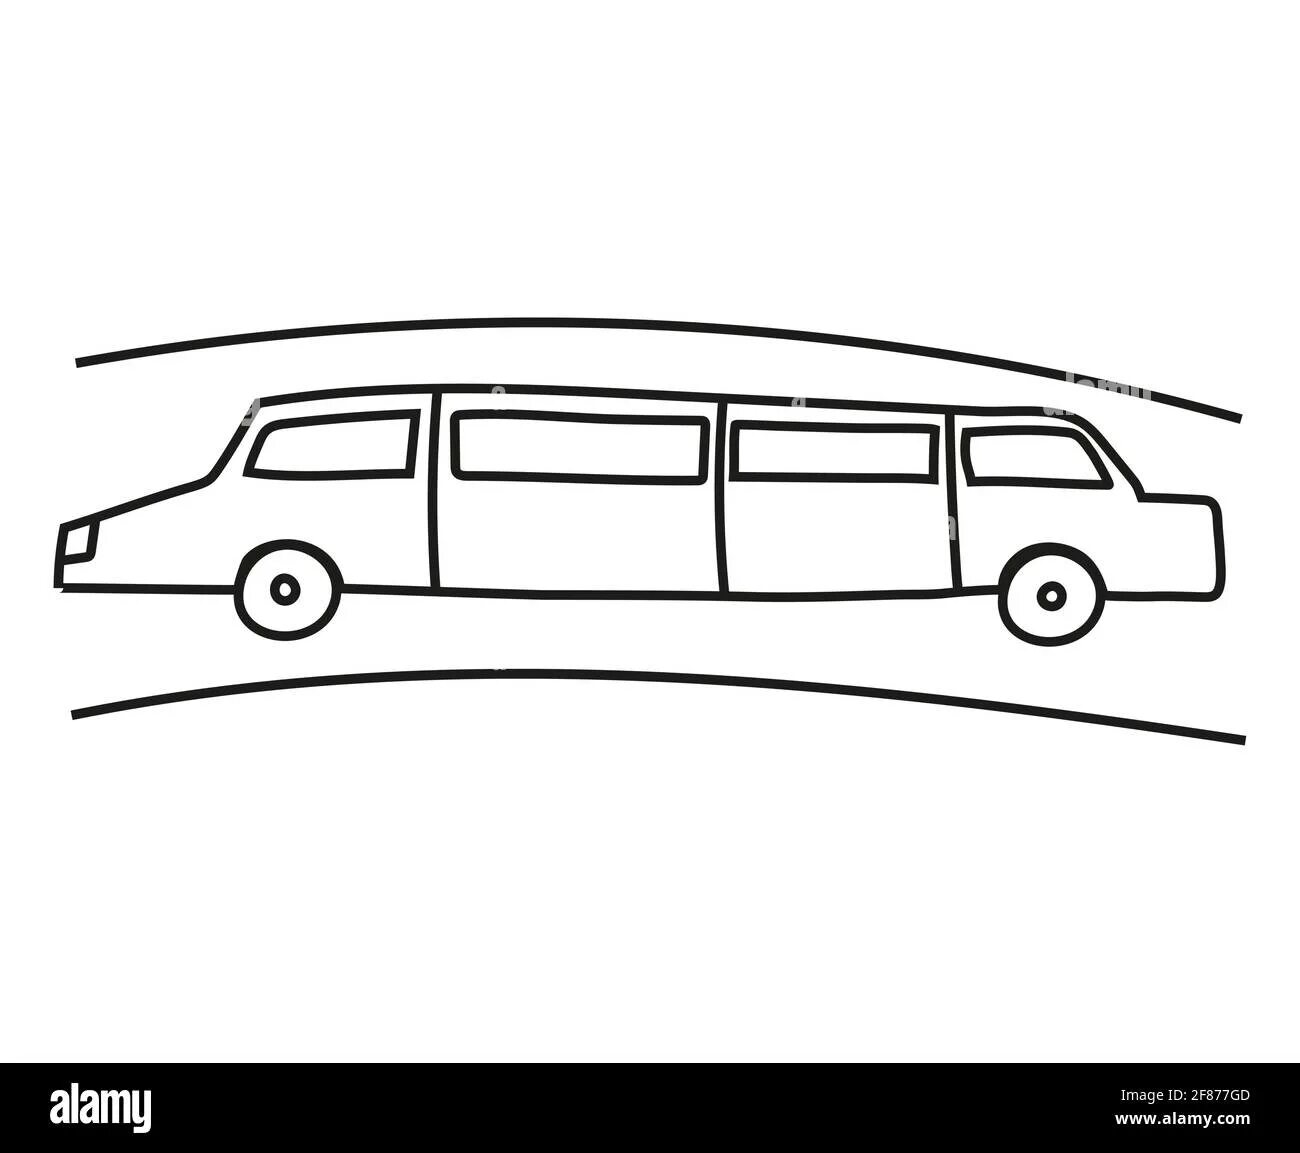 Wonderful limousine coloring pages for kids